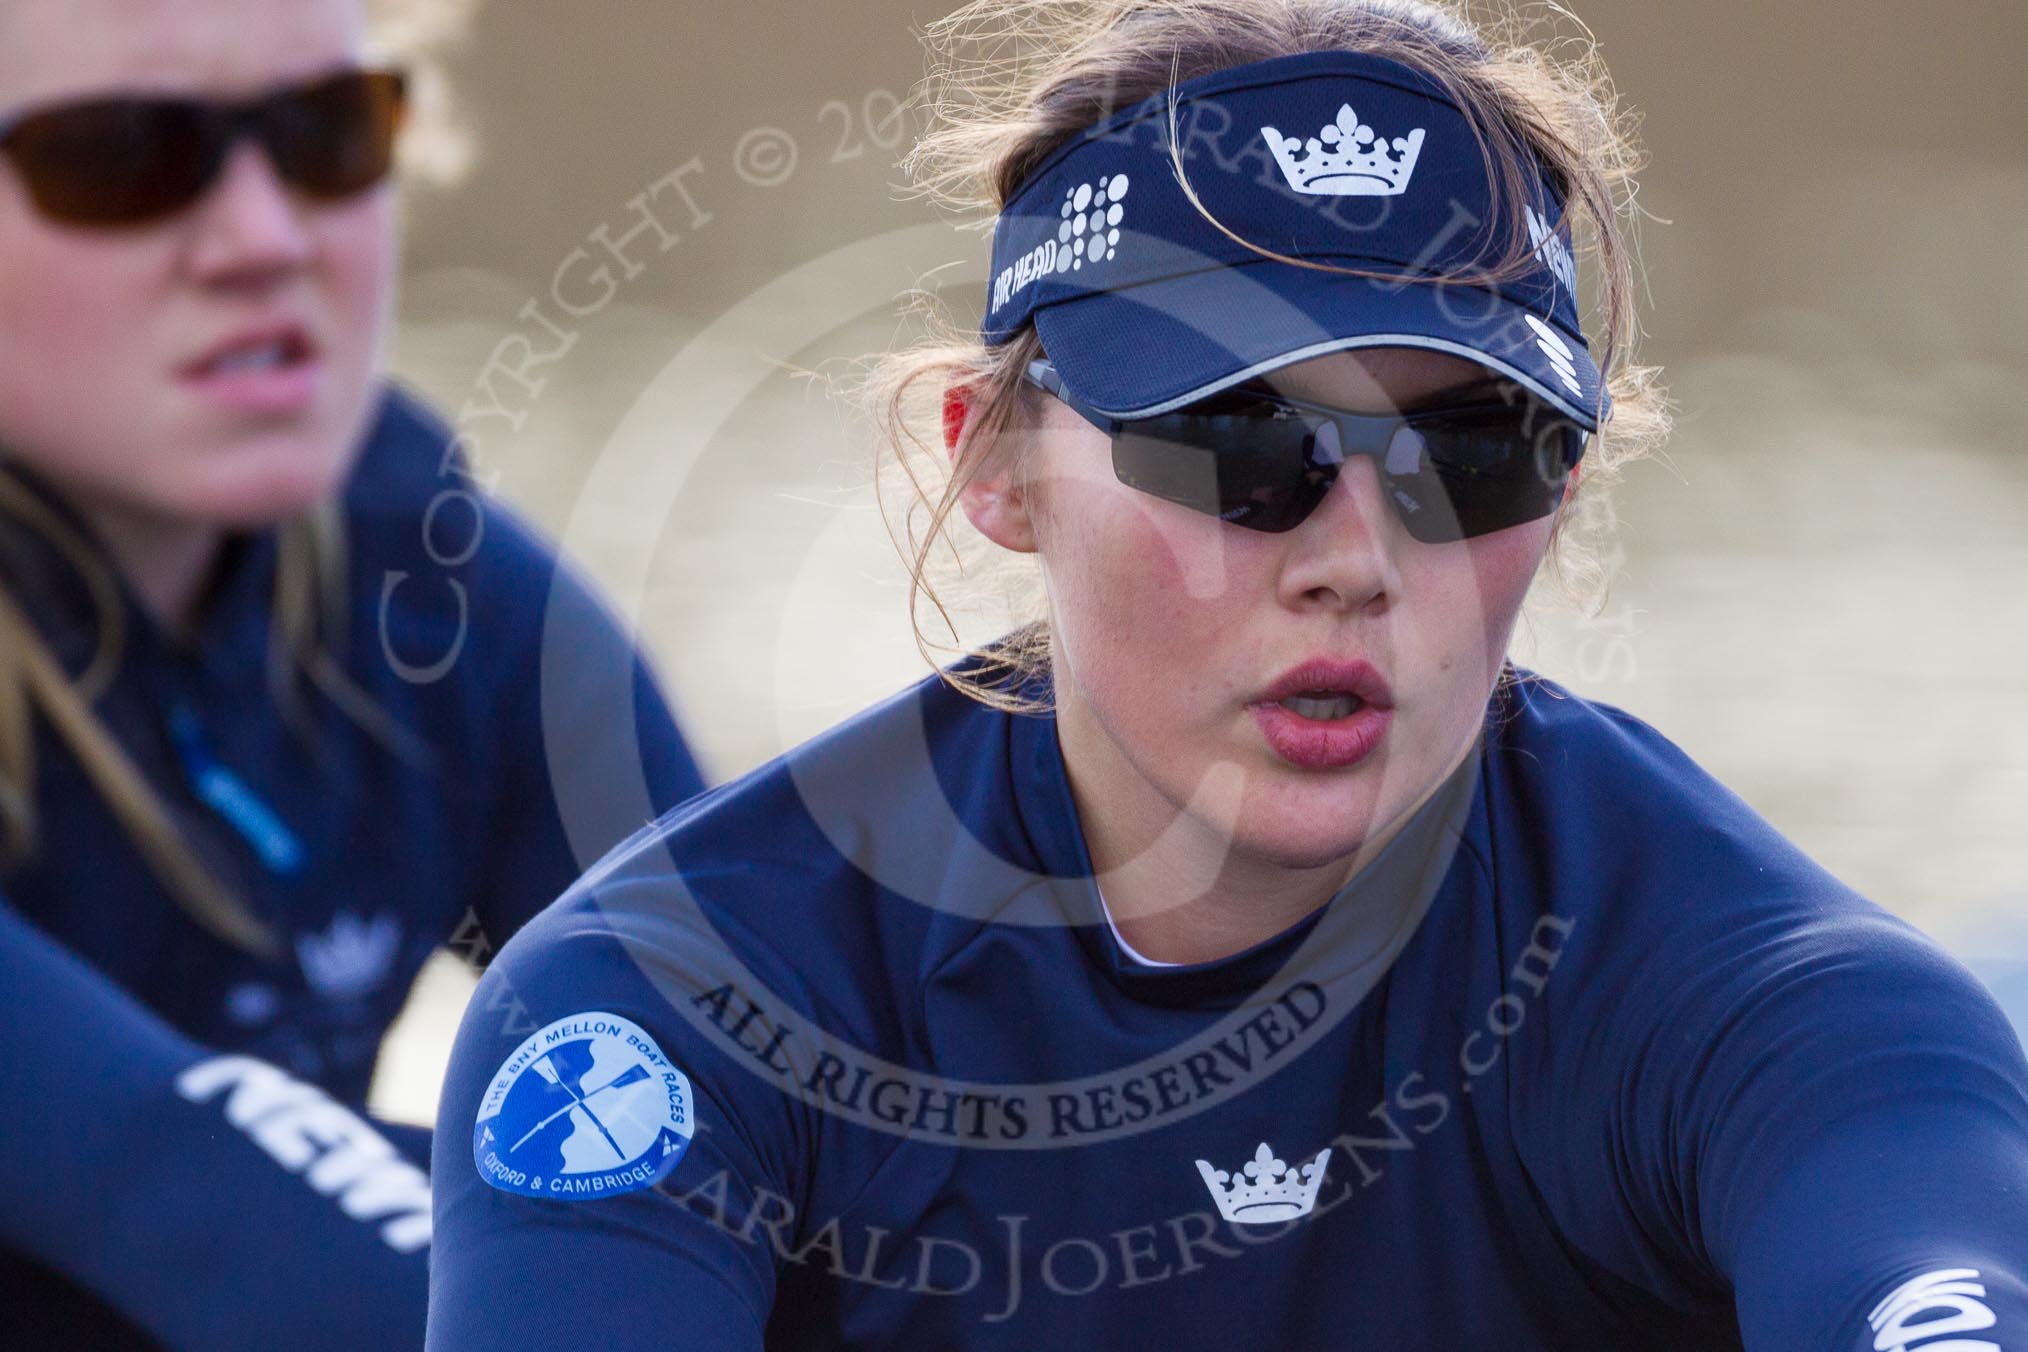 The Boat Race season 2015: OUWBC training Wallingford.

Wallingford,

United Kingdom,
on 04 March 2015 at 15:49, image #92